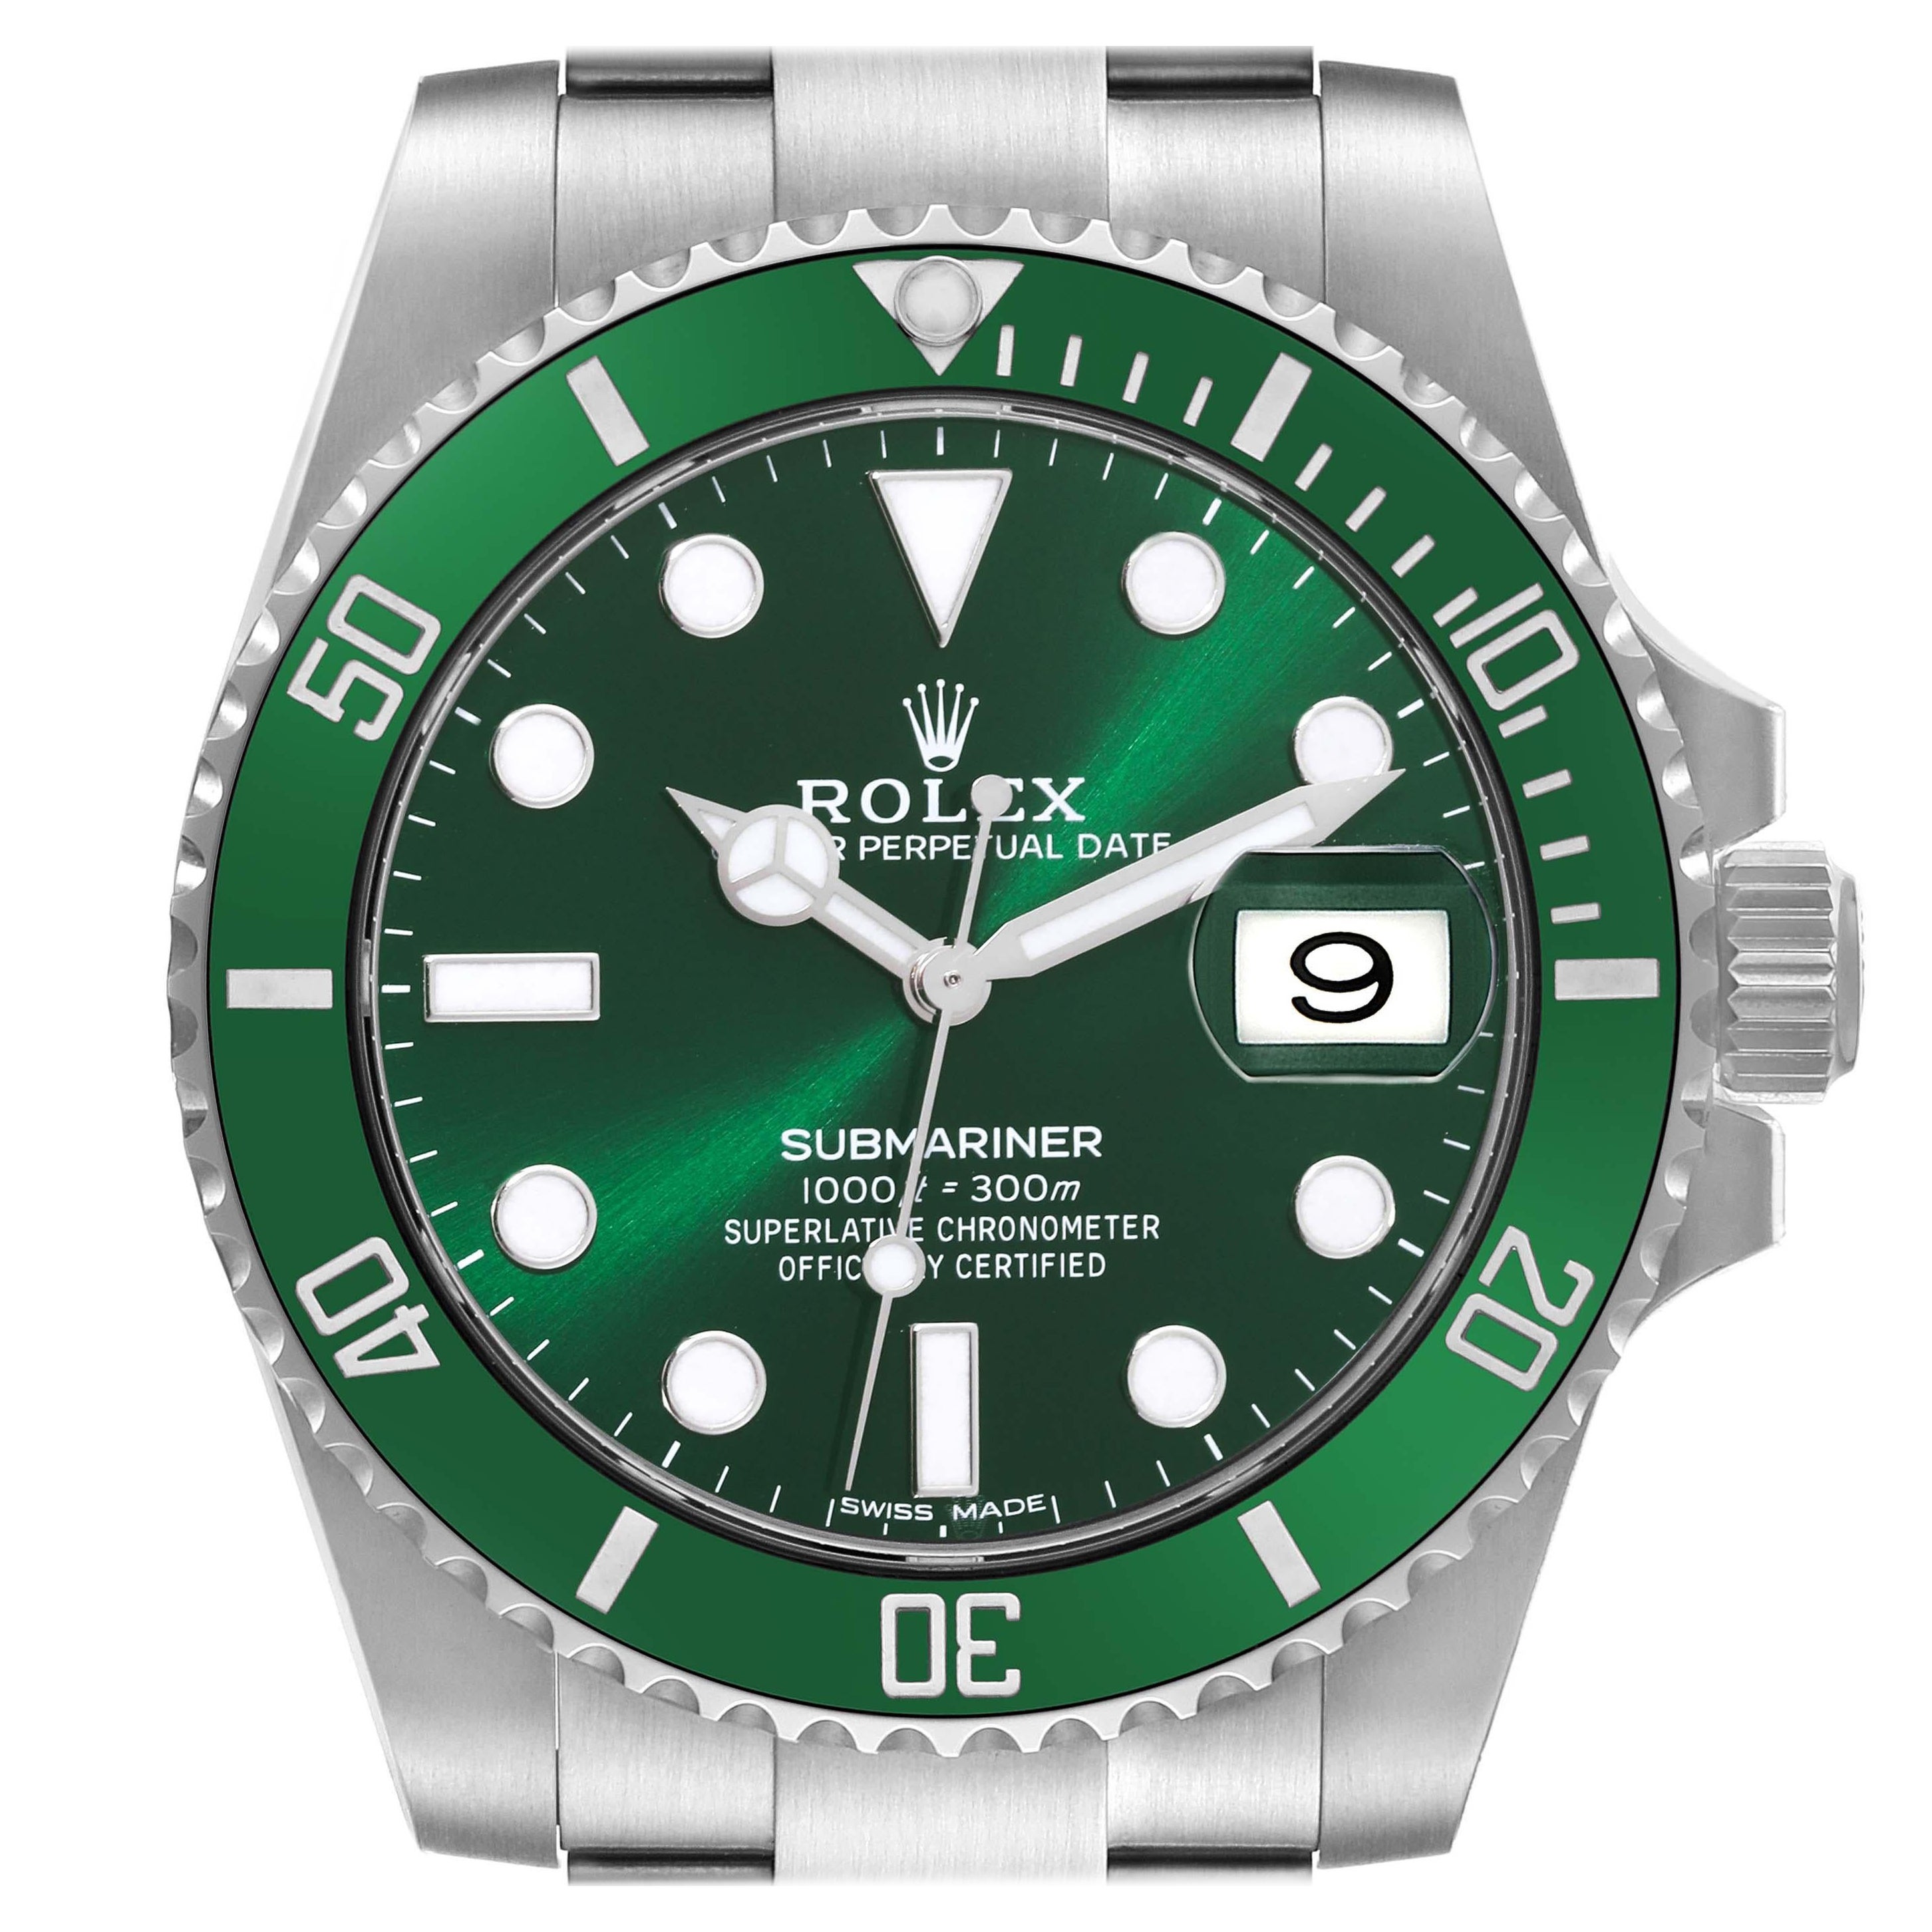 Rolex Submariner Hulk Green Dial Steel Mens Watch 116610LV Box Card For Sale